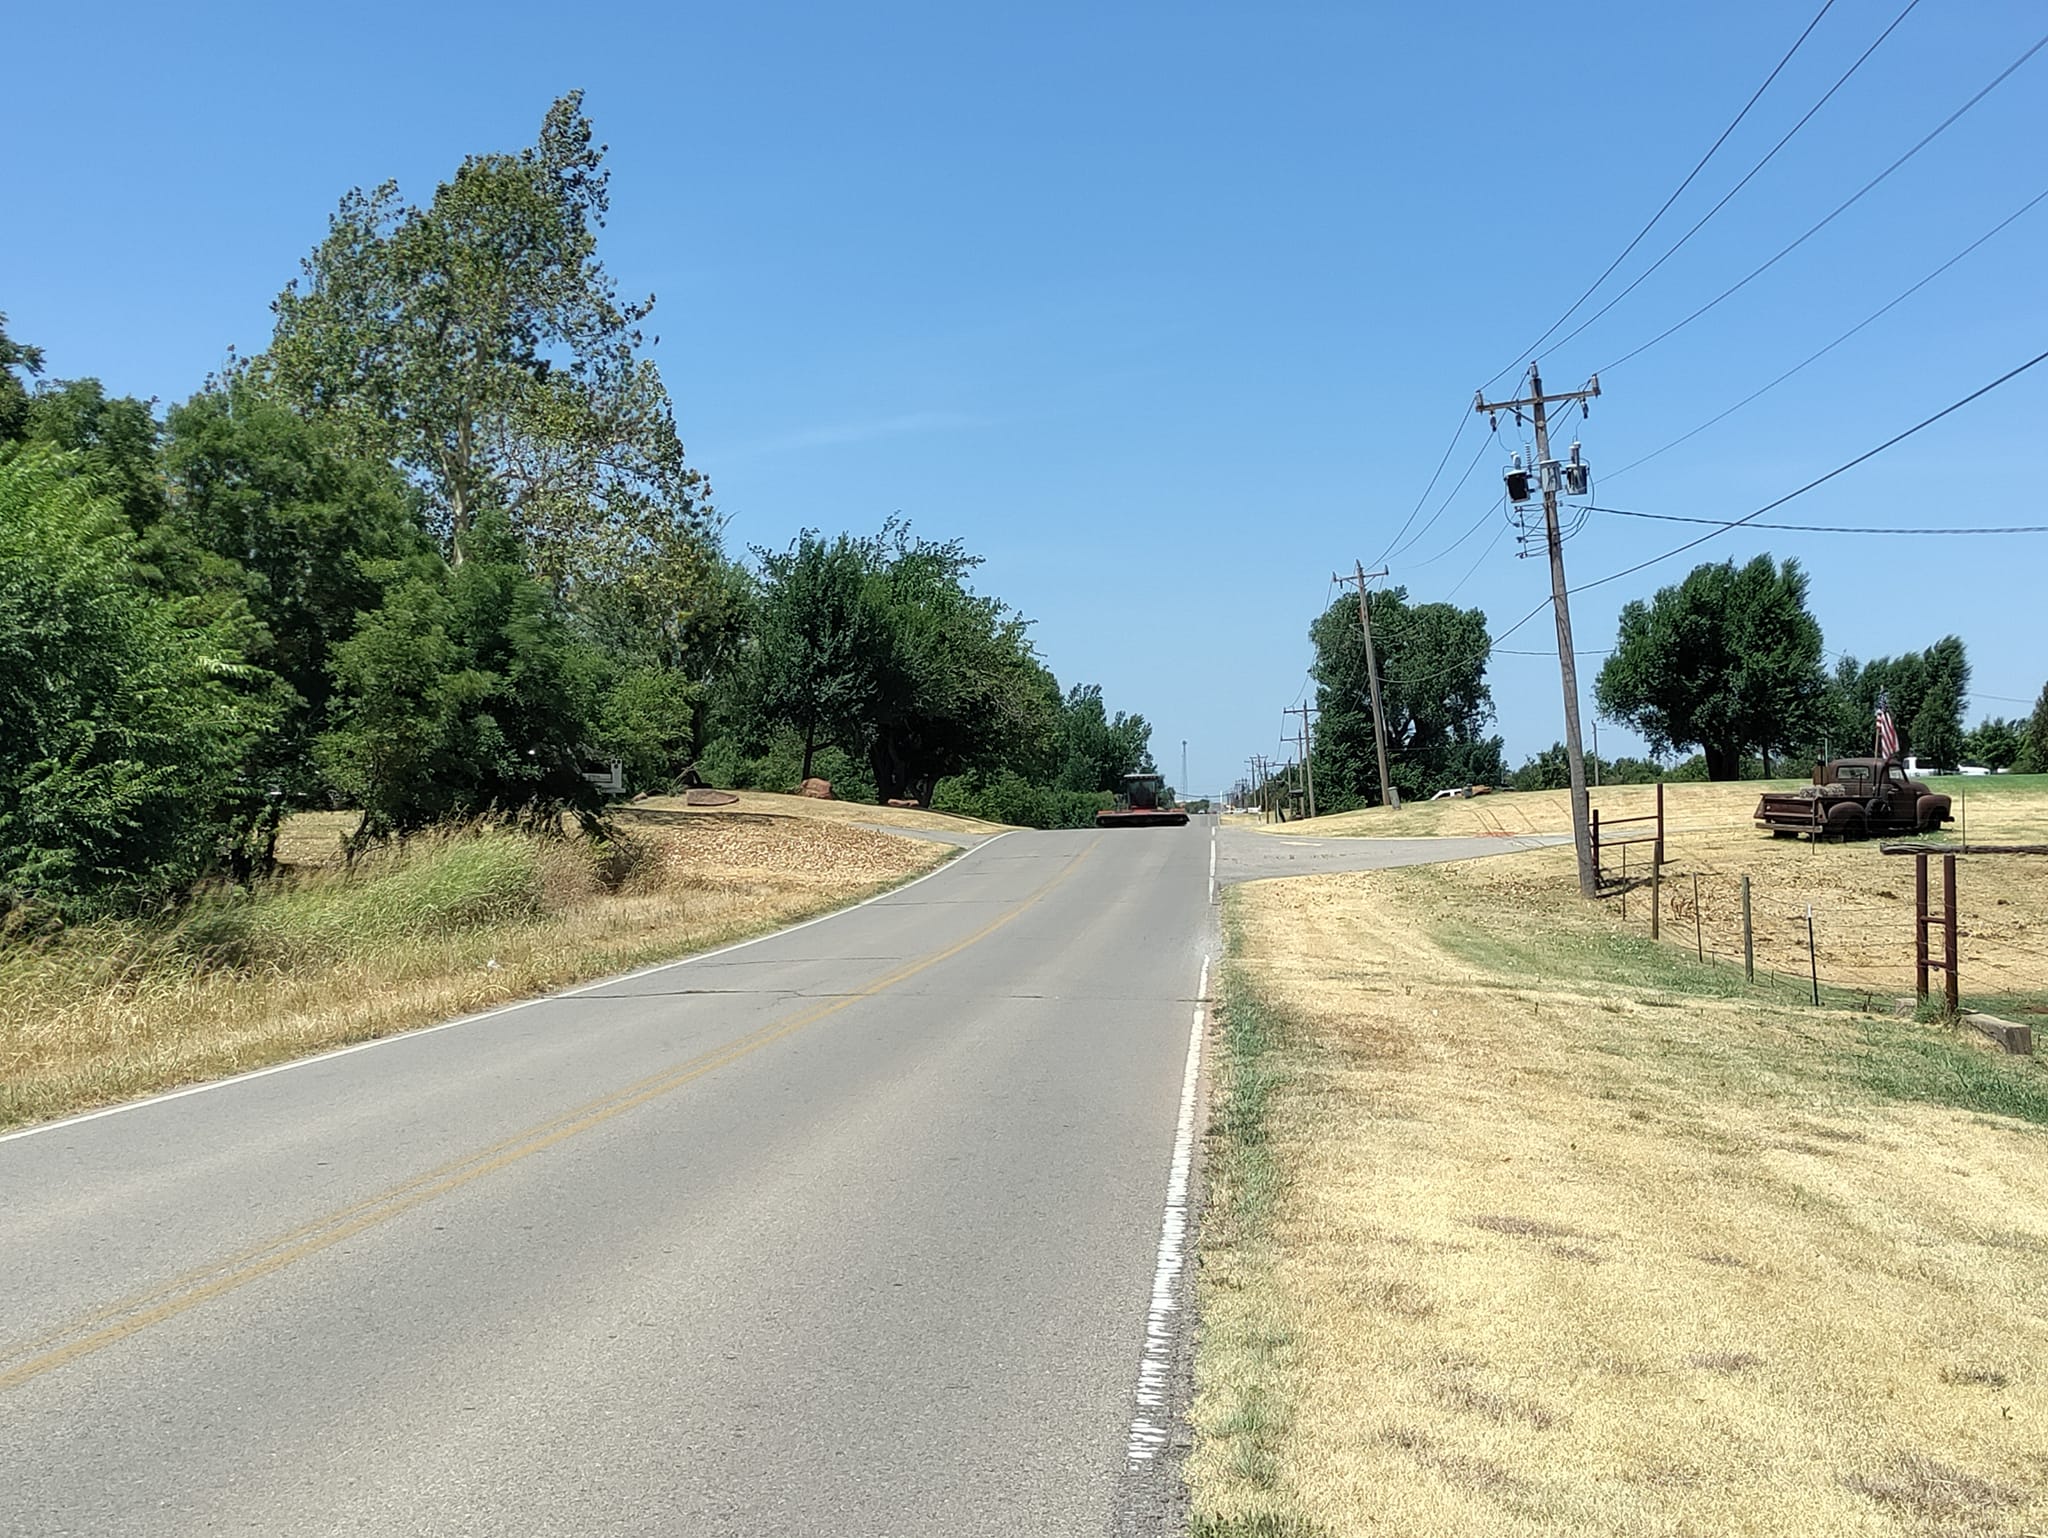 pictures from e-bike ride for groceries in Piedmont, OK